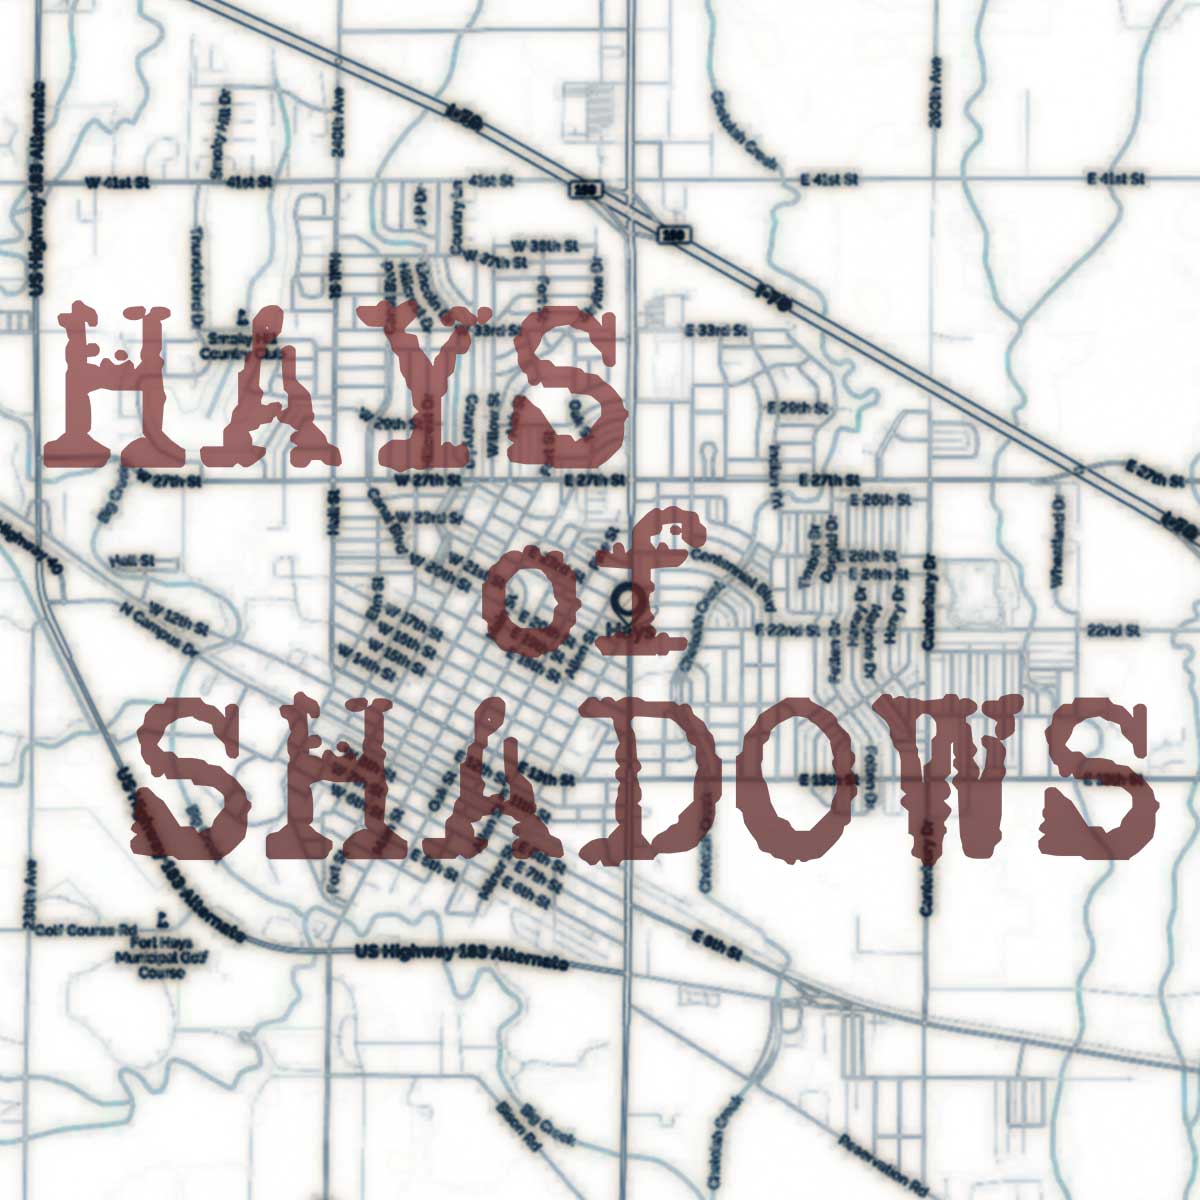 Critical Hit #425: Hays of Shadows: Character Creation Part 1 (US01)